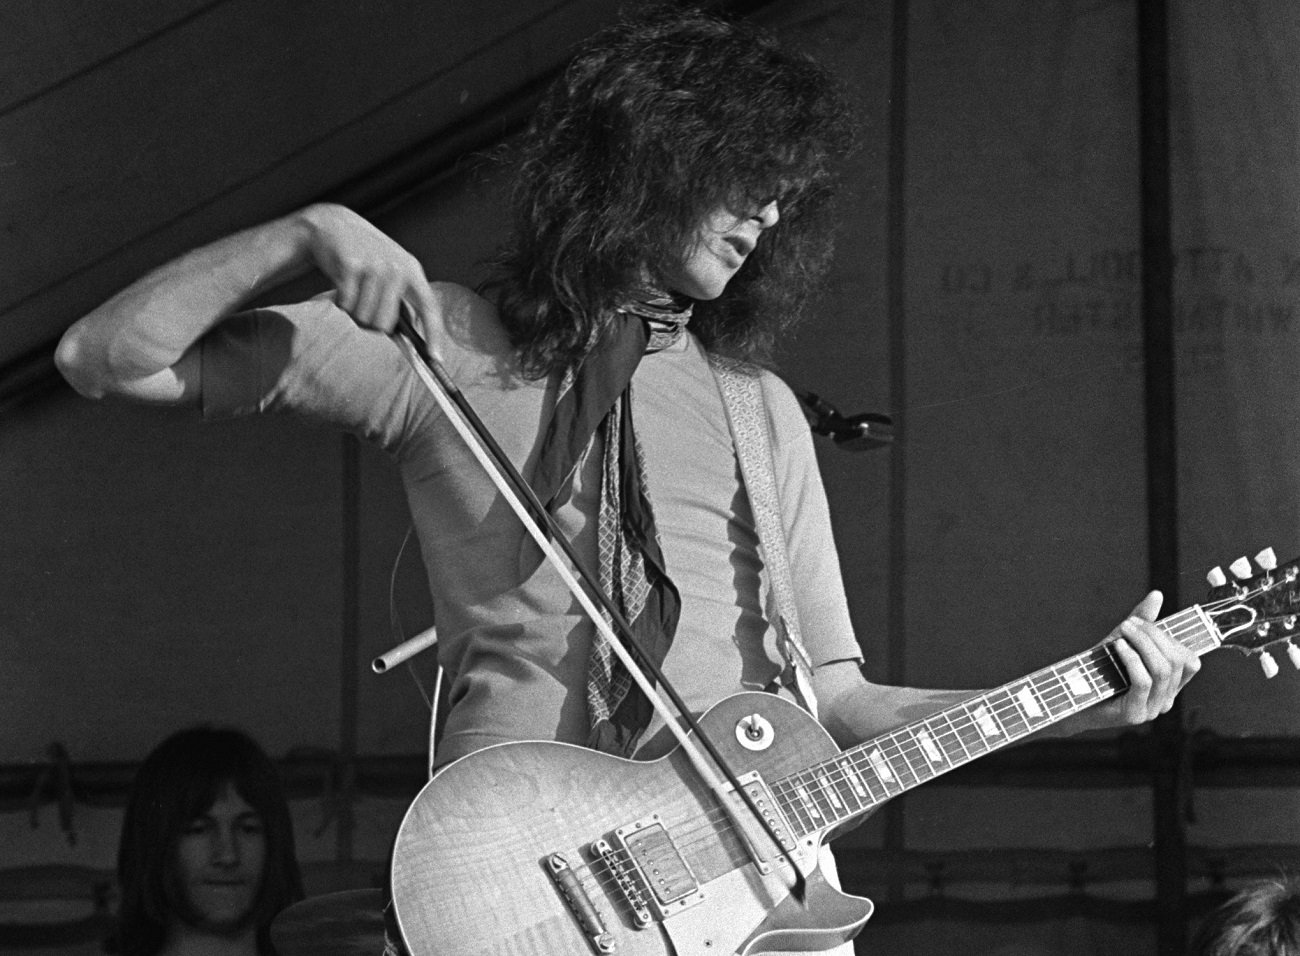 Jimmy Page playing his guitar on stage with a bow